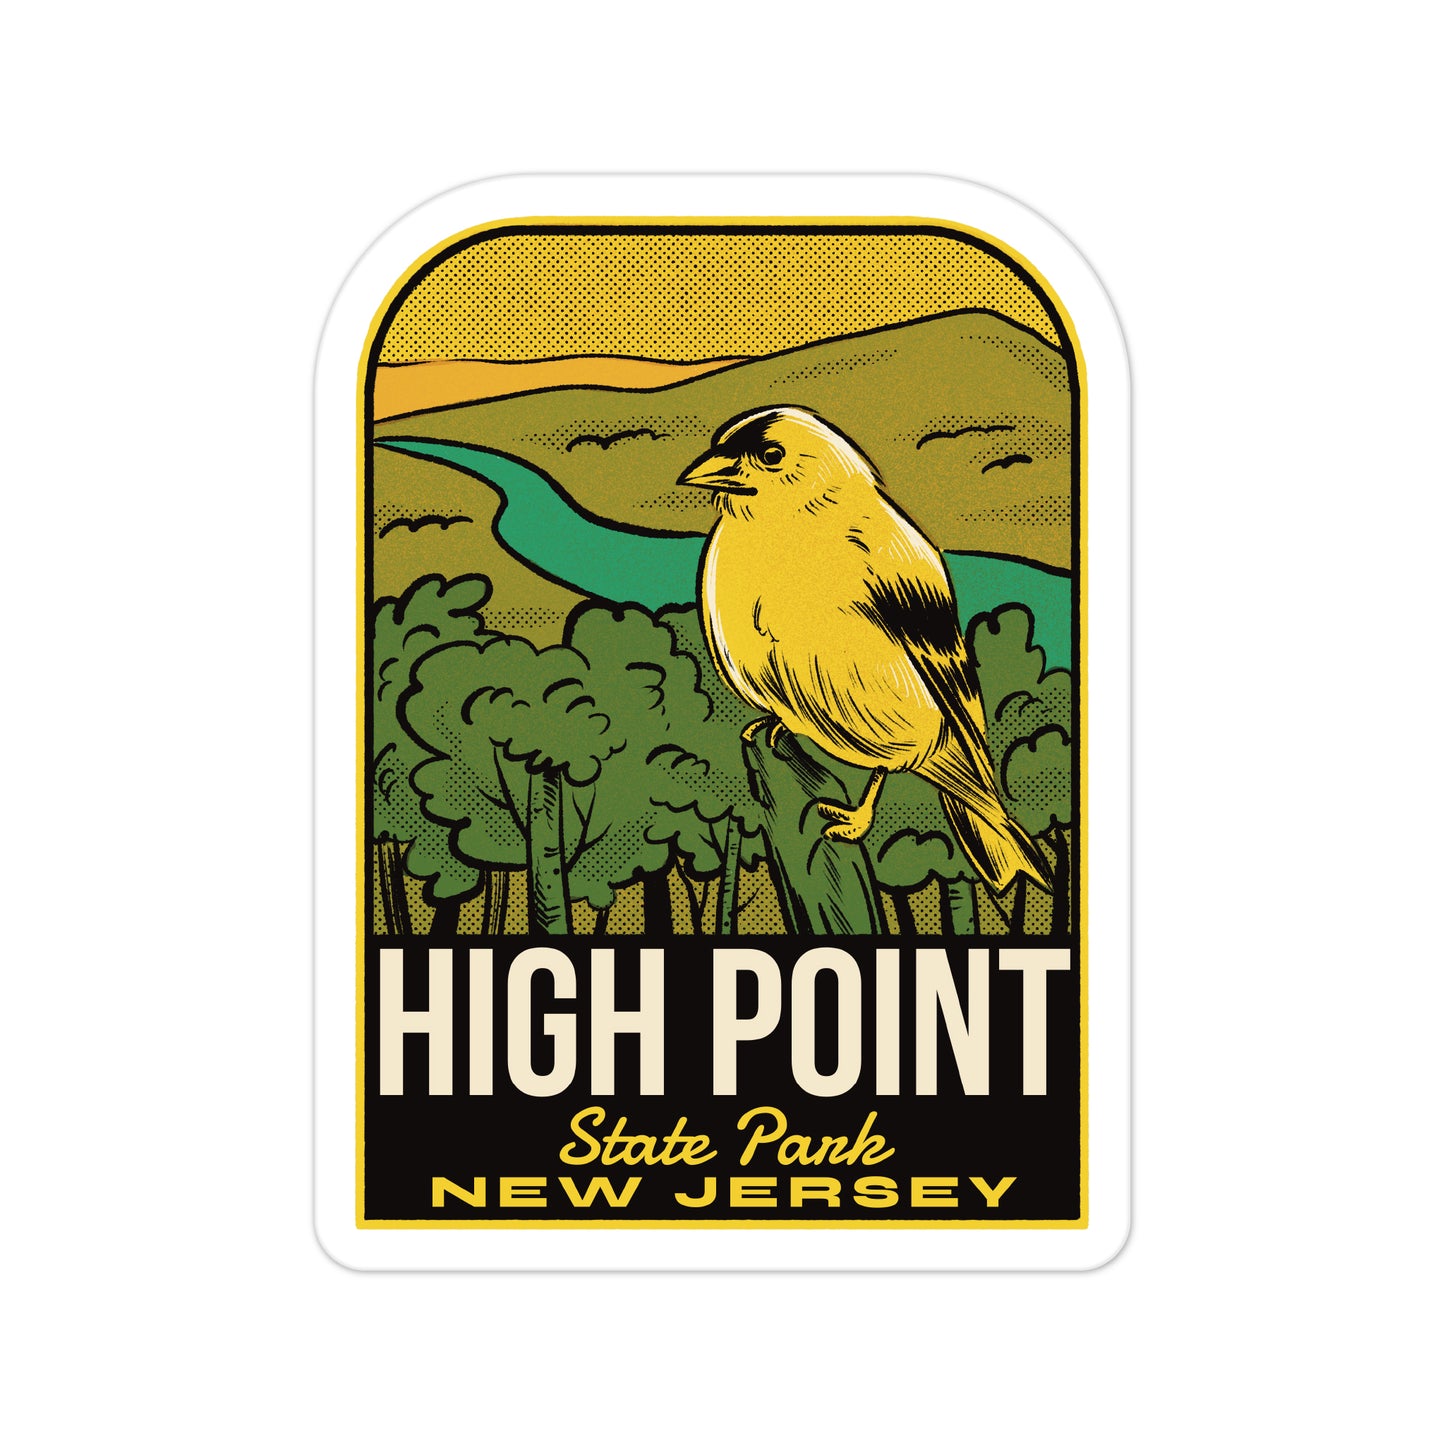 A sticker of High Point State Park